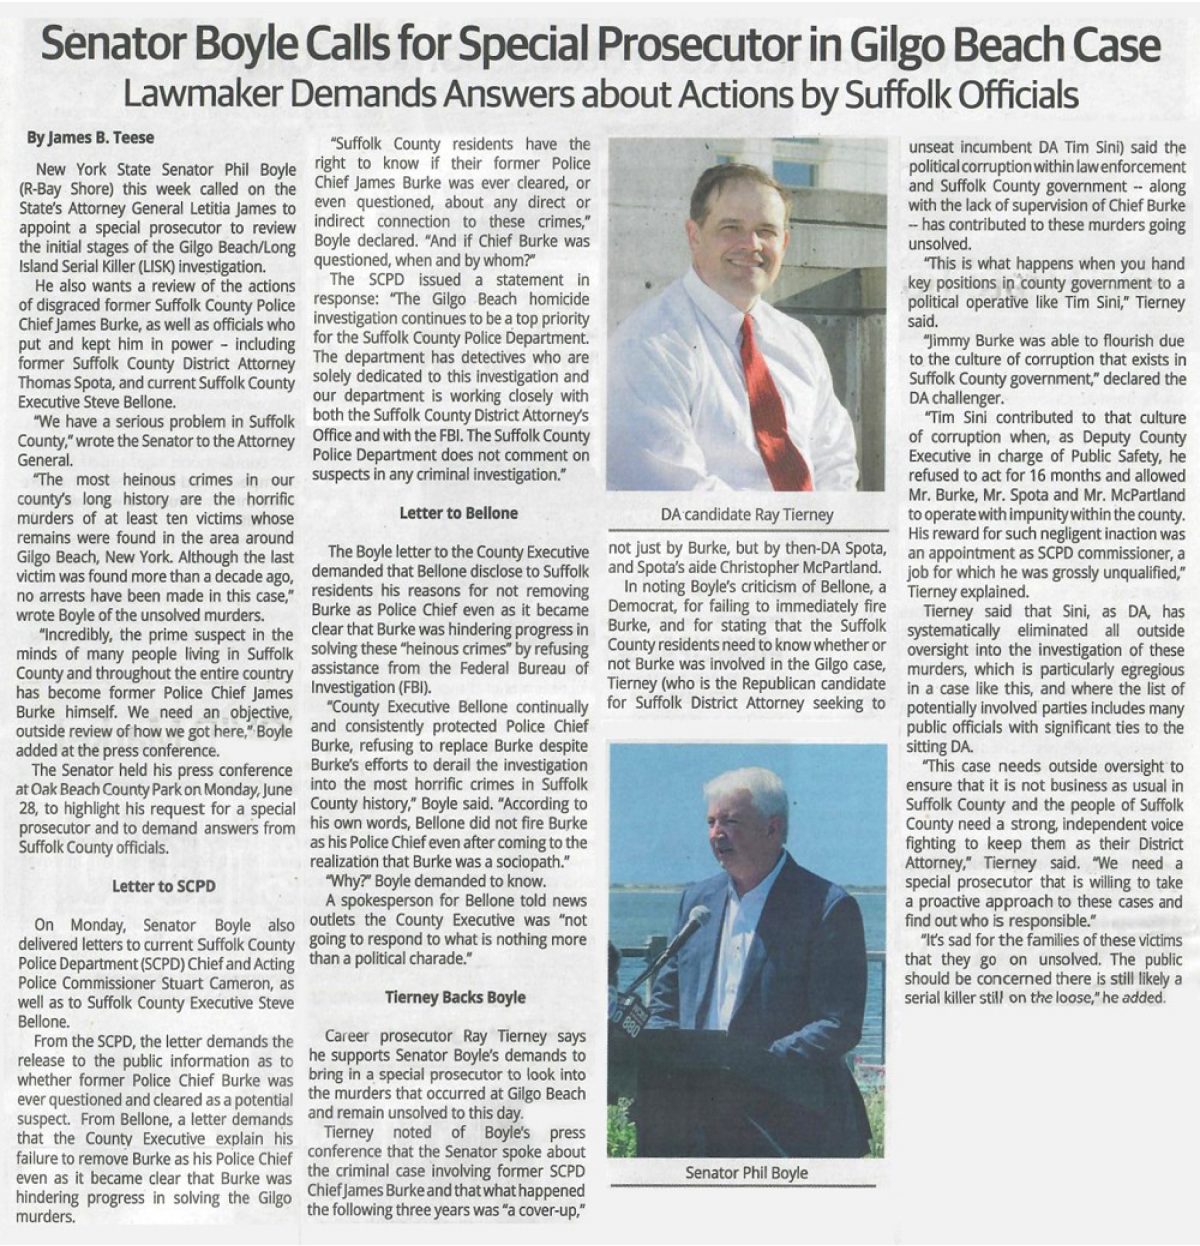 Ray Tierney Featured in Smithtown Messenger for His Support of Sen. Boyle’s Call for Special Prosecutor